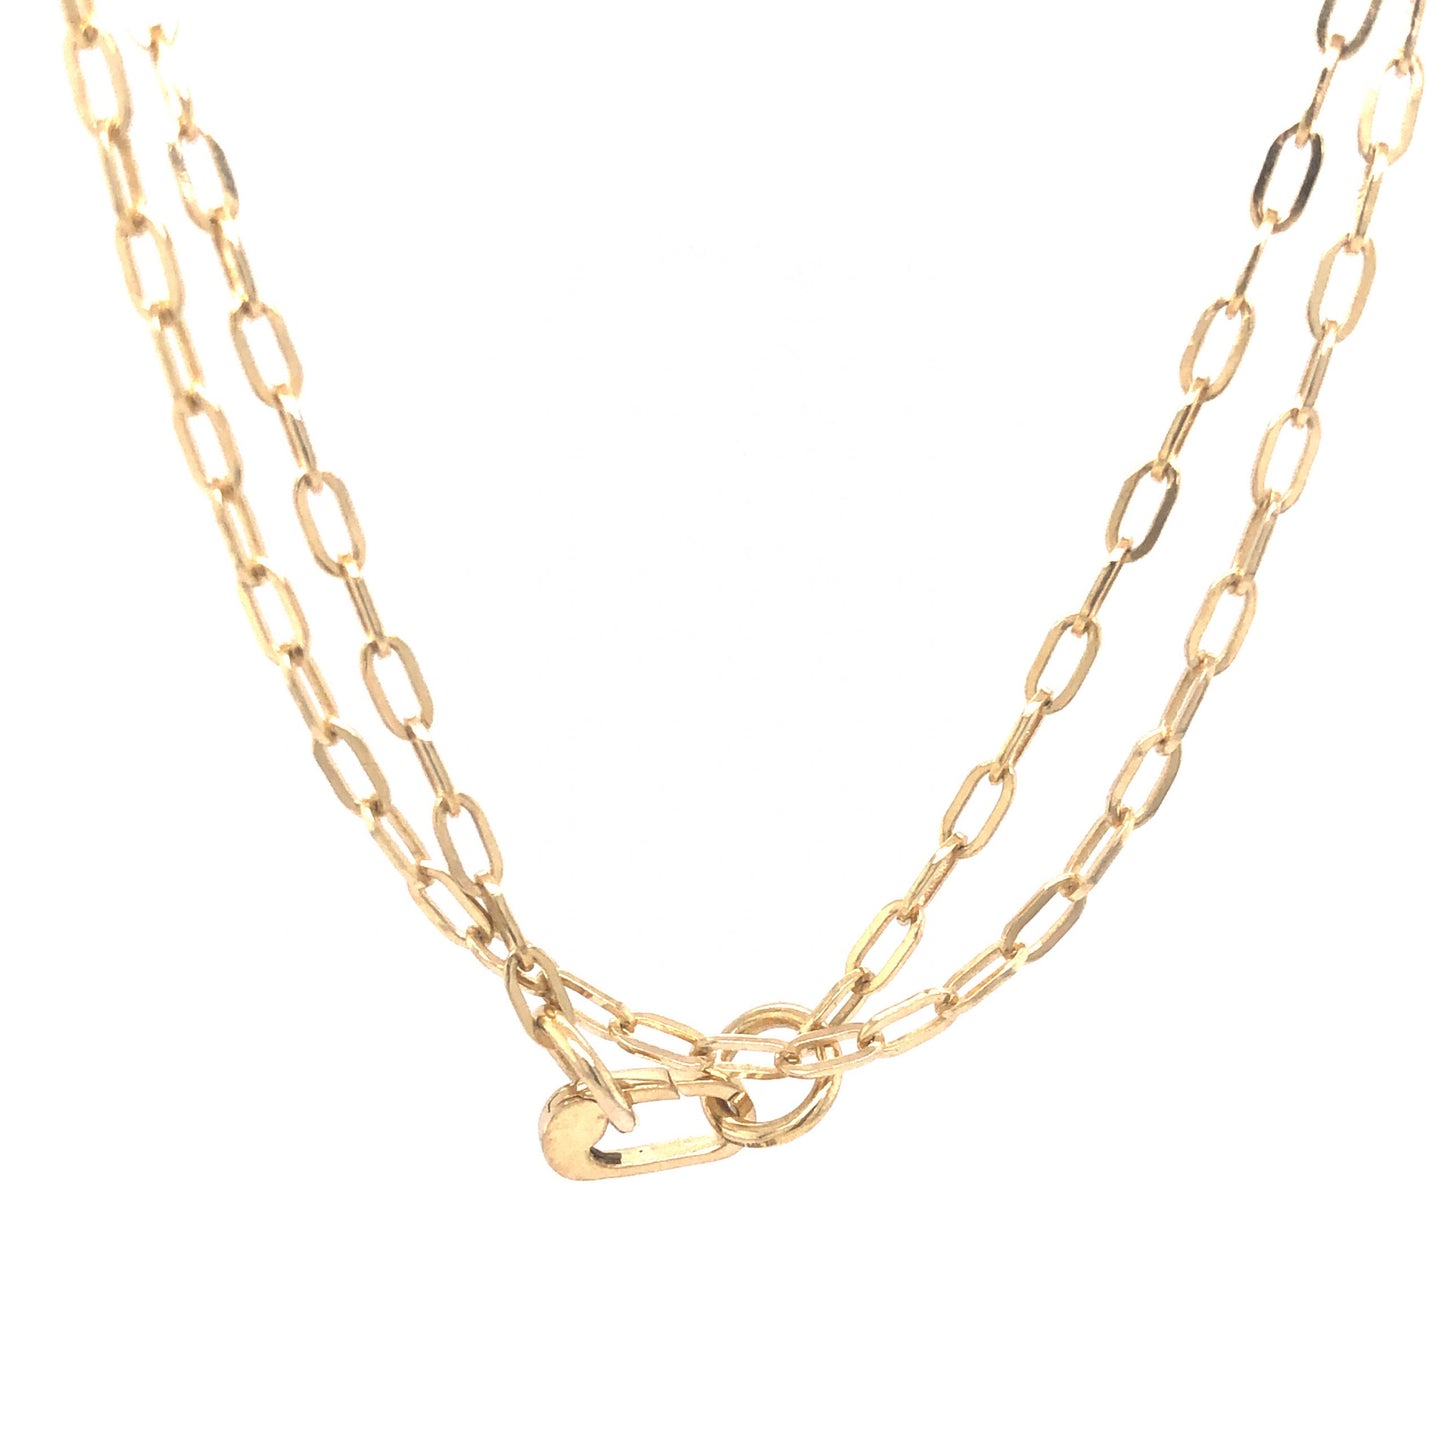 30 Inch Paperclip Chain Necklace in 14k Yellow Gold